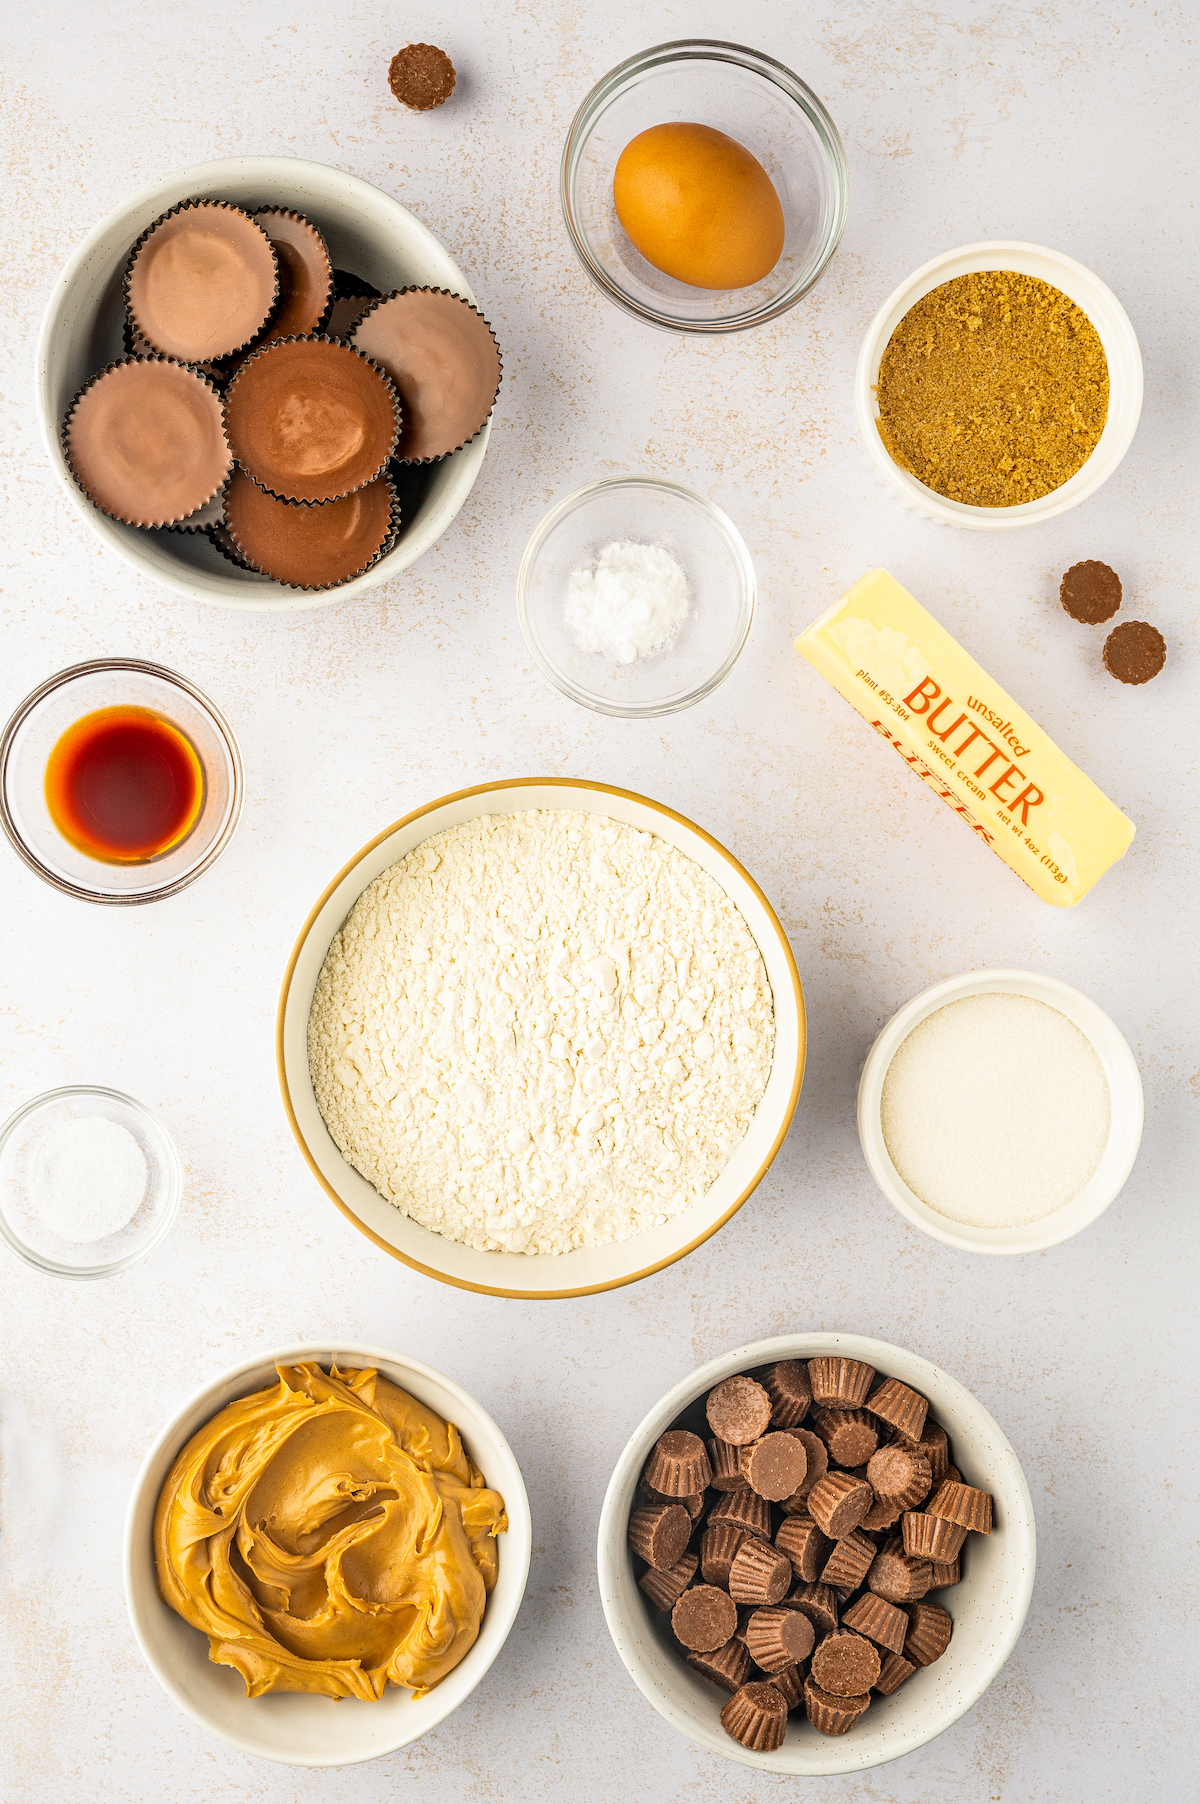 Ingredients for Reeses Cookies arranged in bowls.